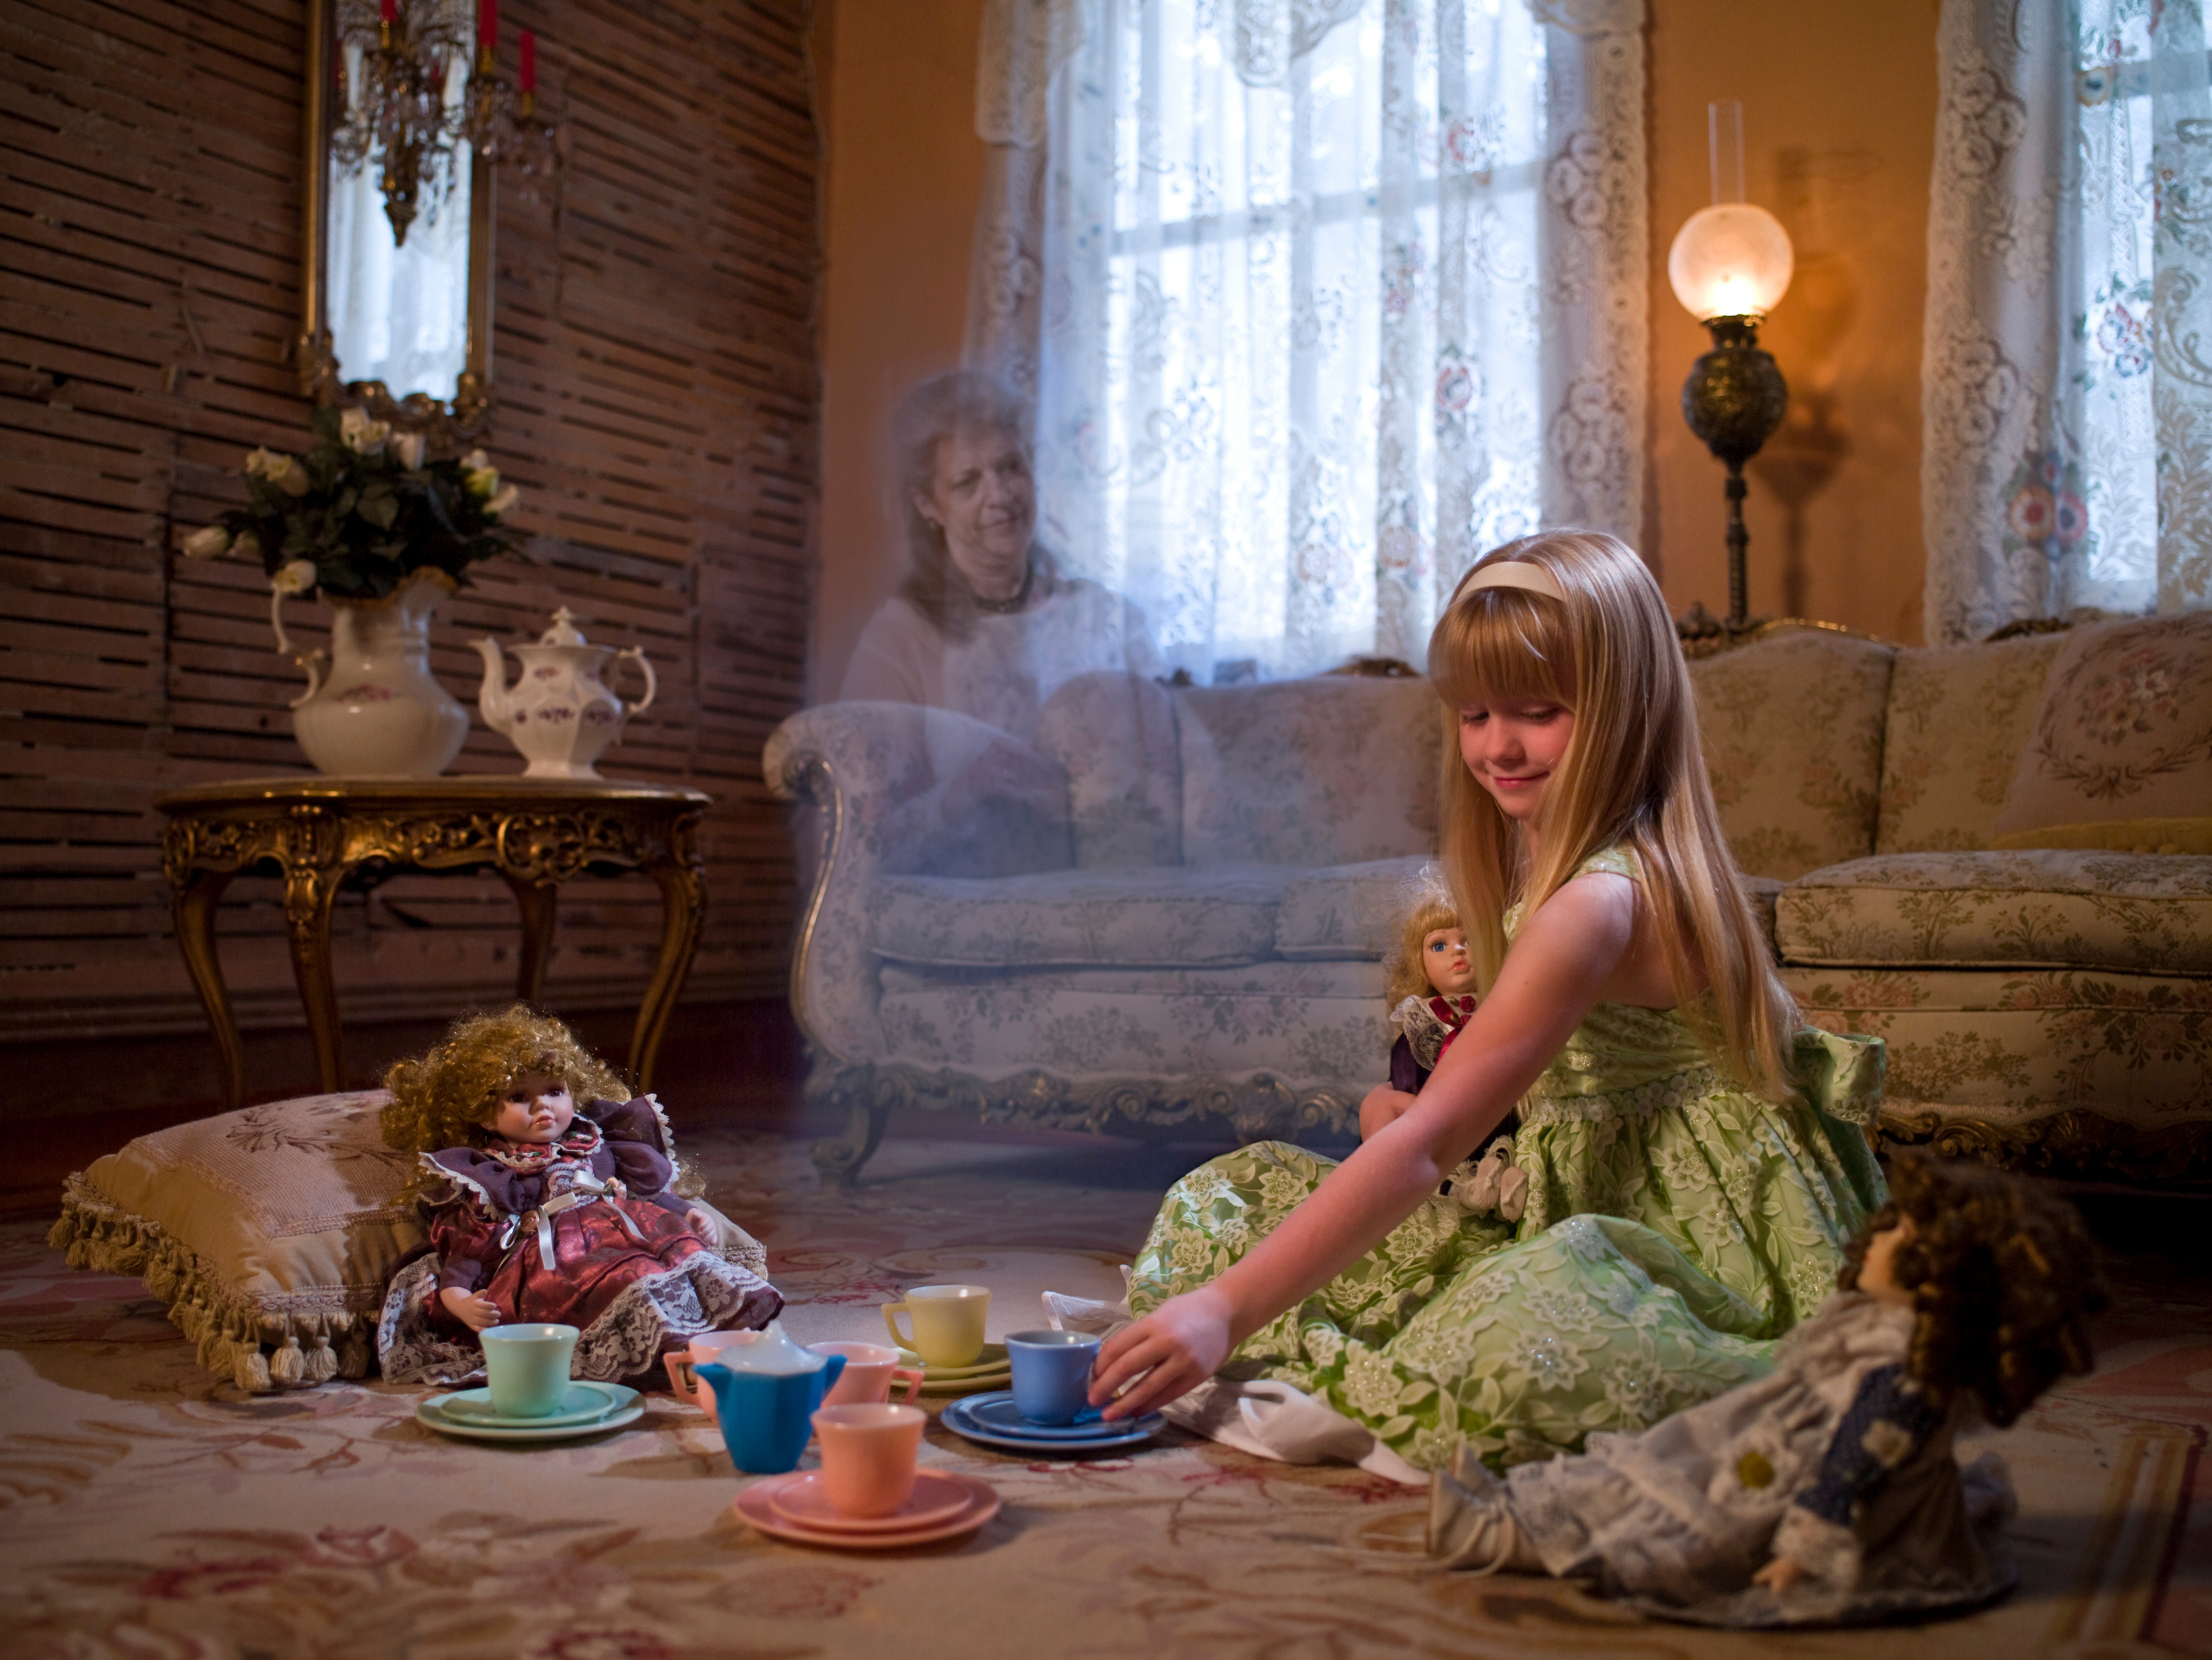 Young girl having tea party with dolls, while a ghost watches on from behind her